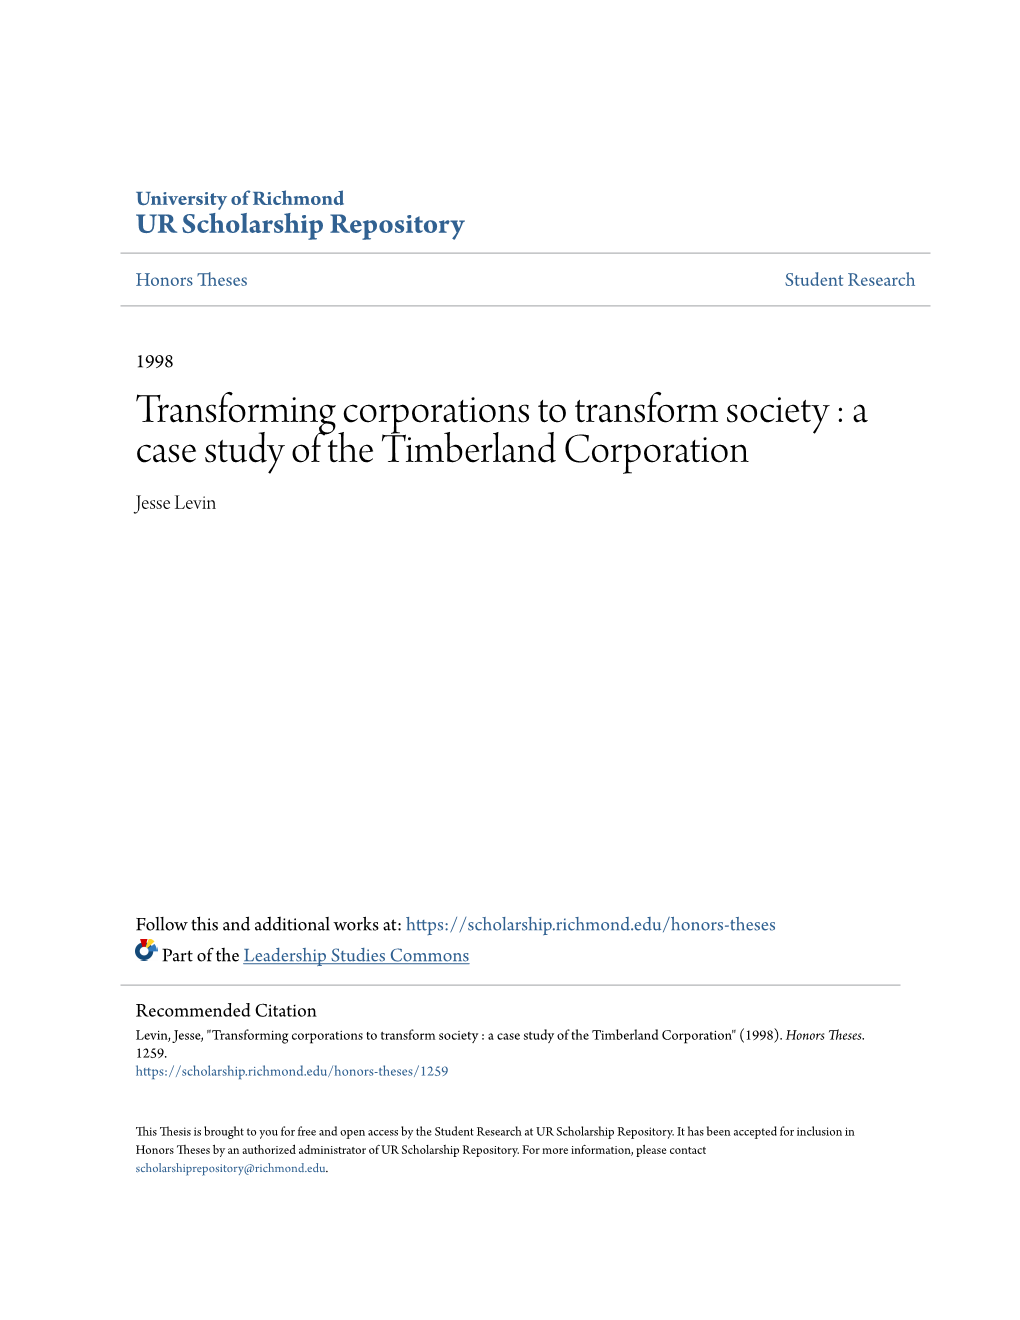 A Case Study of the Timberland Corporation Jesse Levin